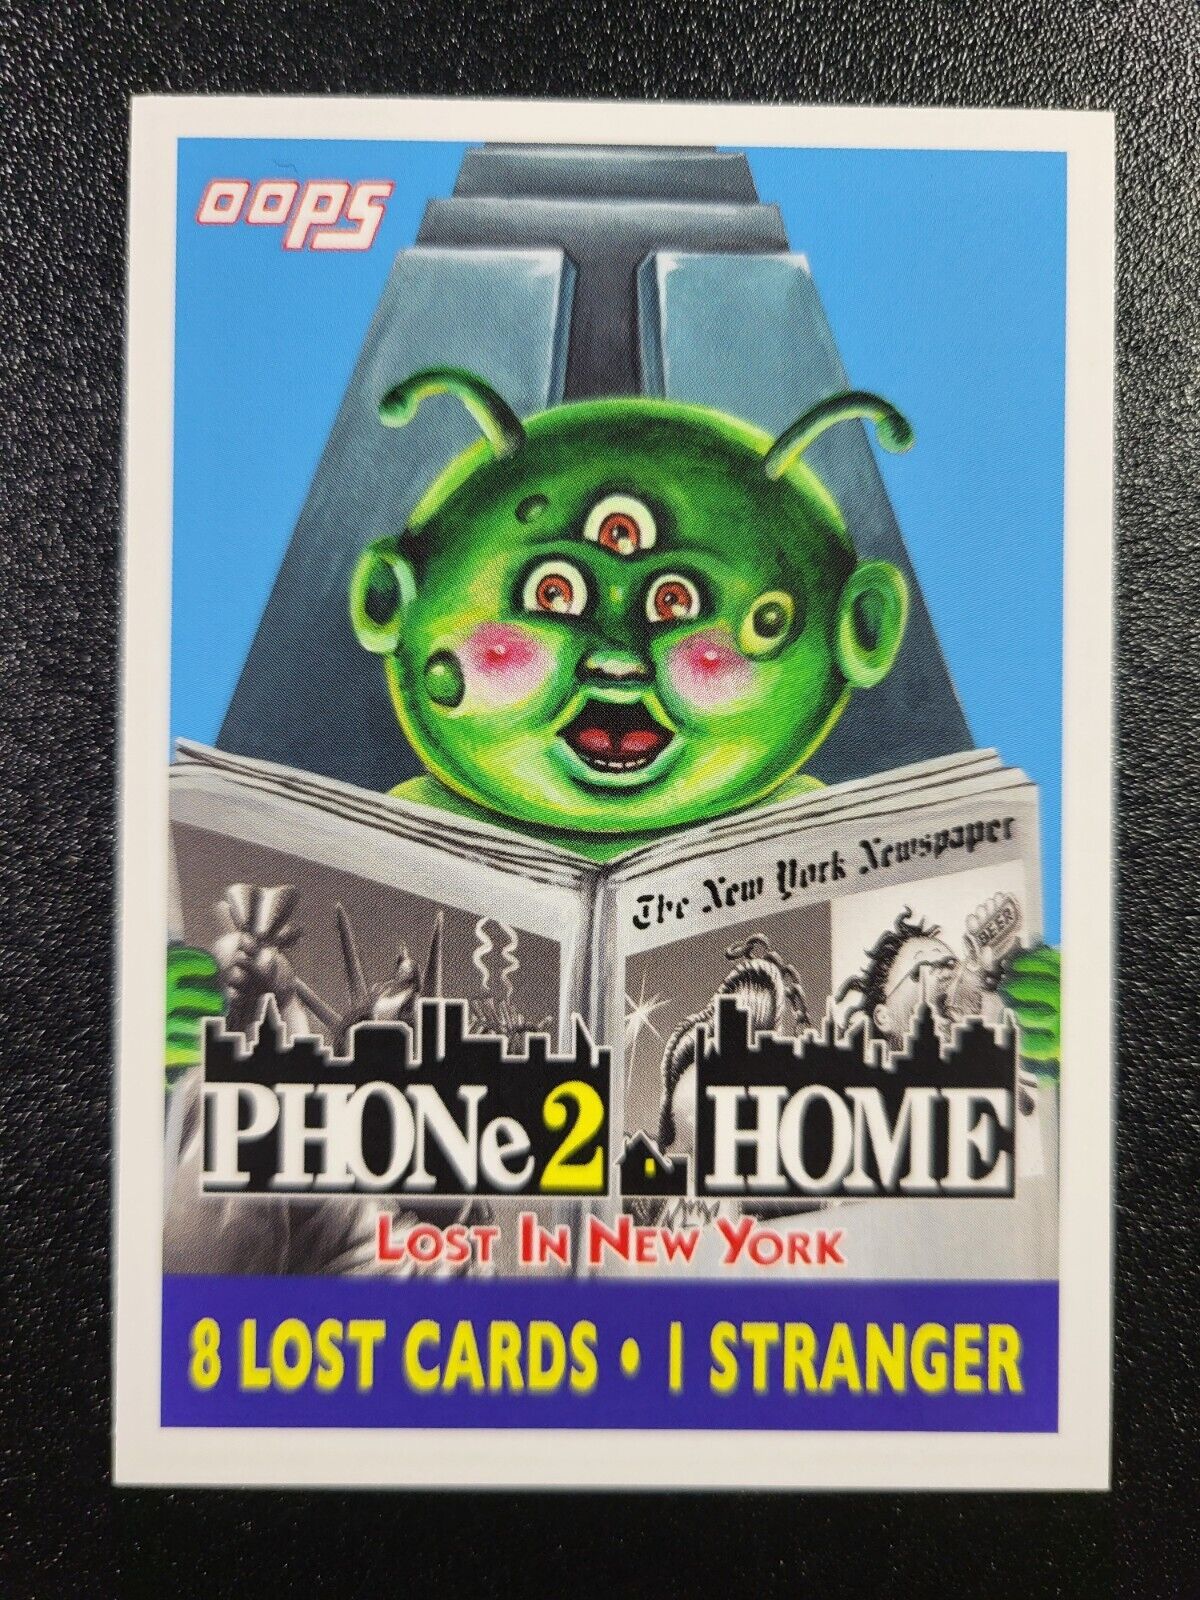 Phone2 Home 90s Wax Parody Home Alone 2 E.T. Spoof 2019 Garbage Pail Kids Card